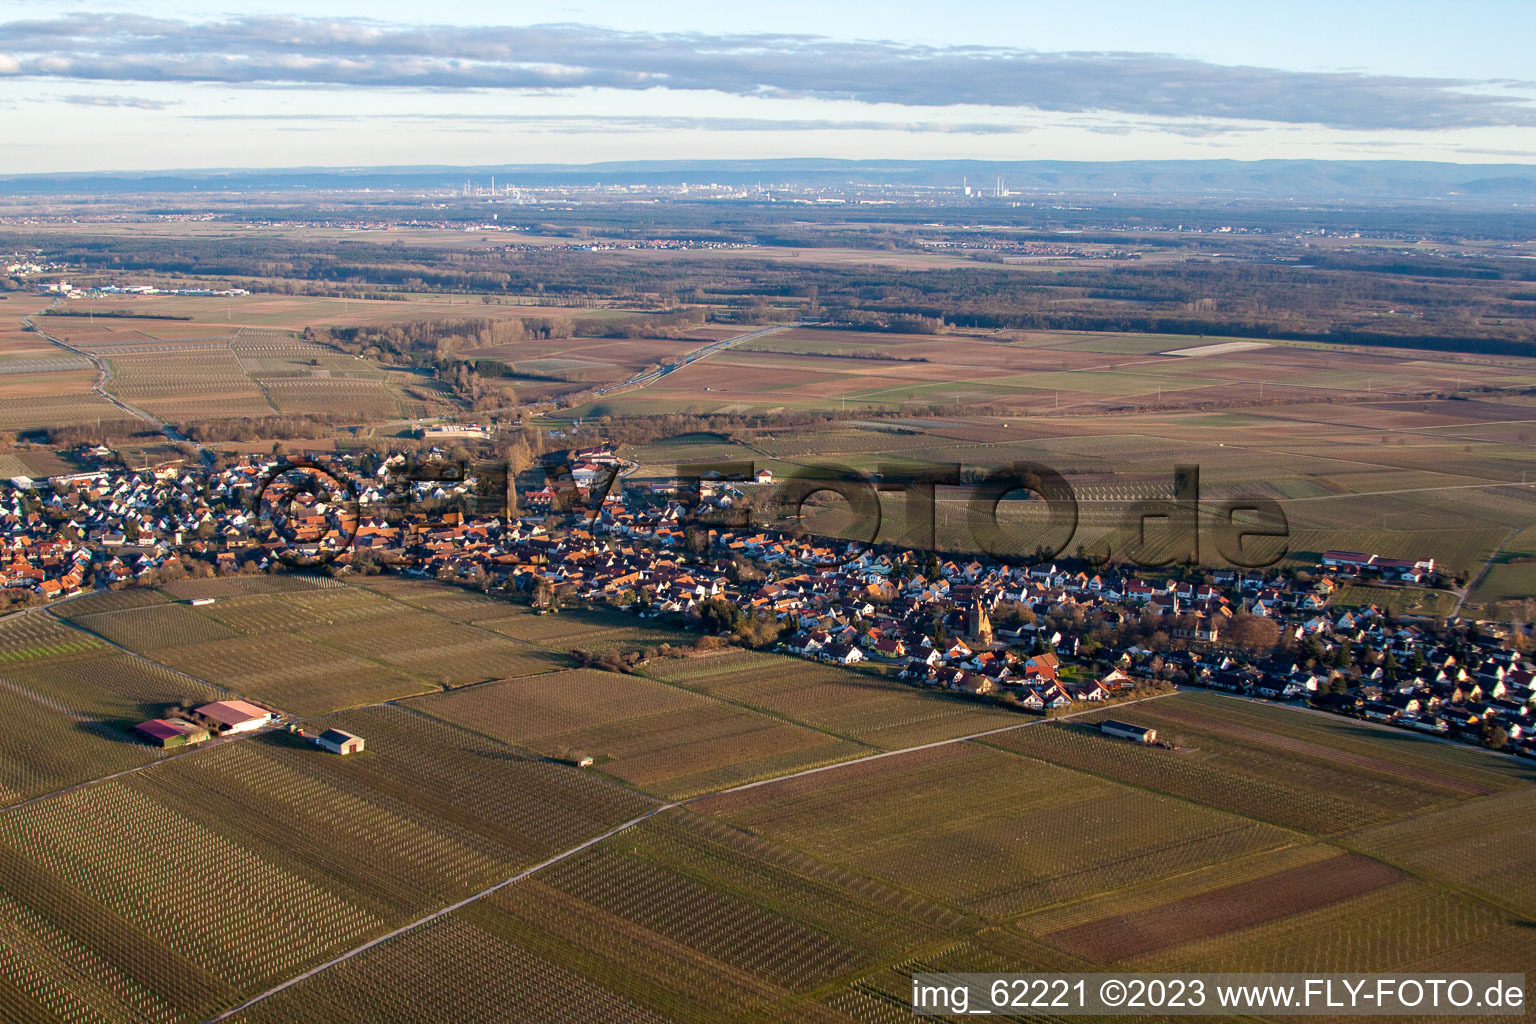 Aerial photograpy of Insheim in the state Rhineland-Palatinate, Germany